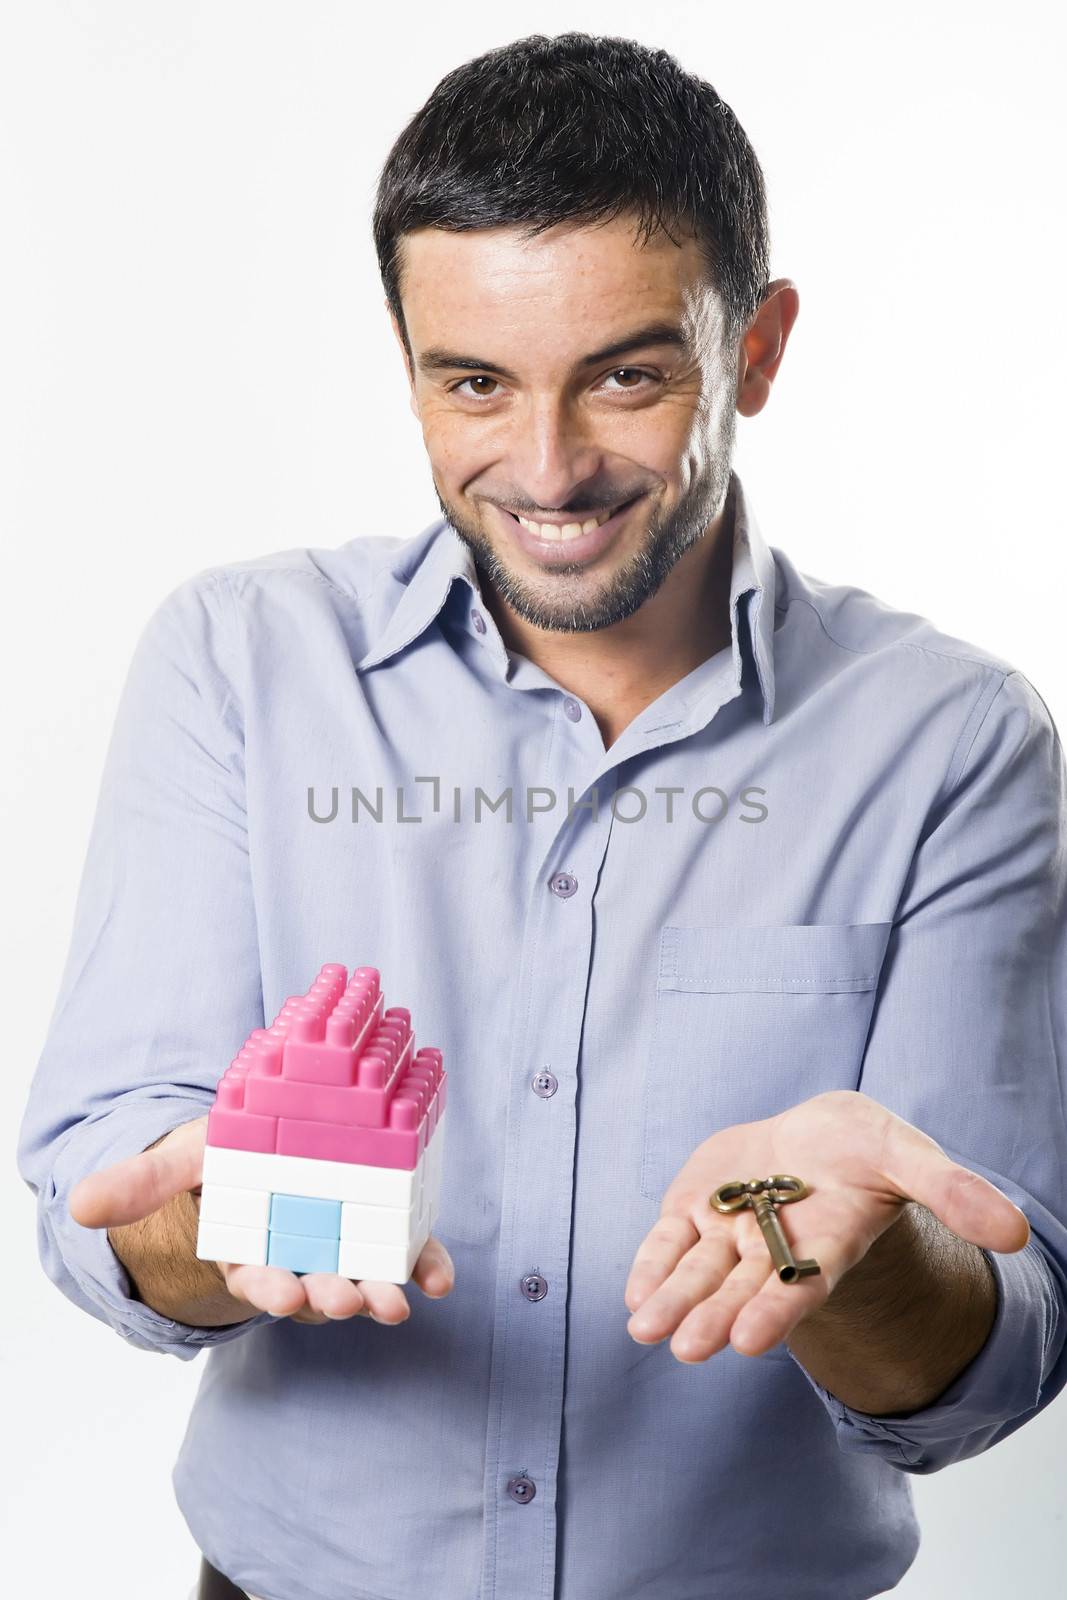 Young Handsome Man presenting Miniature House and Key